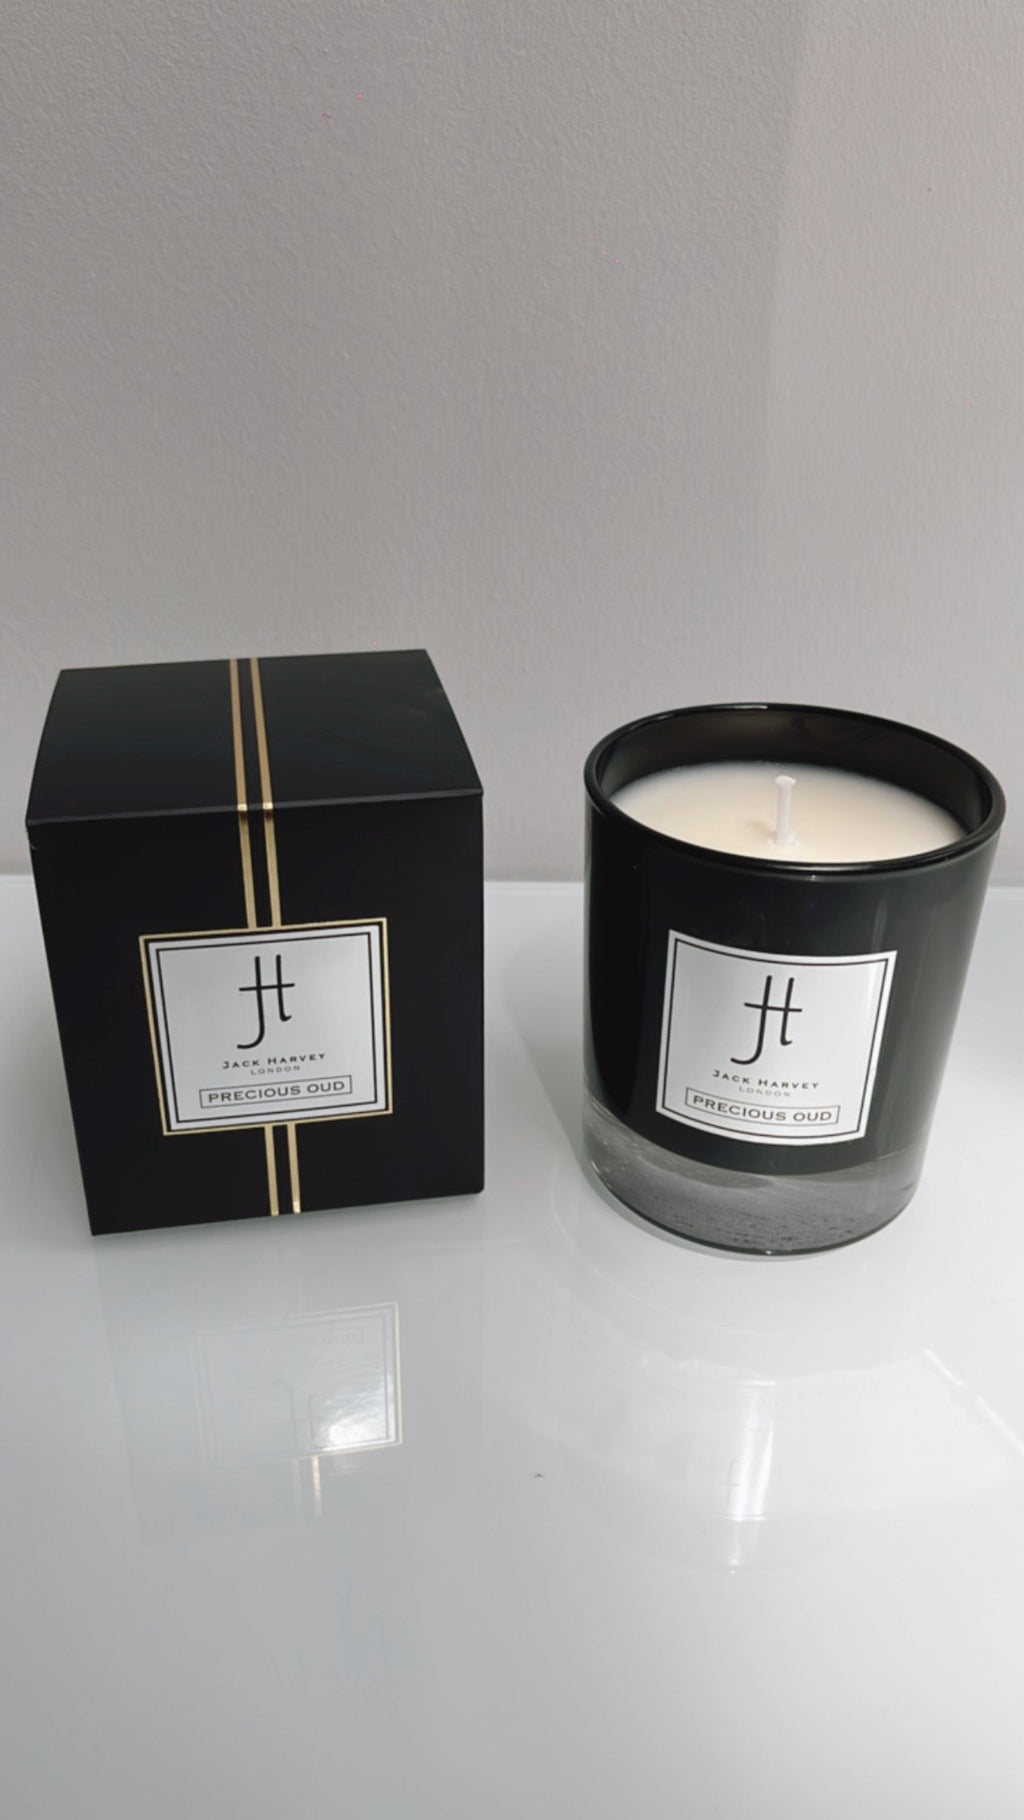 Hotel Collection - Classic My Way Candle